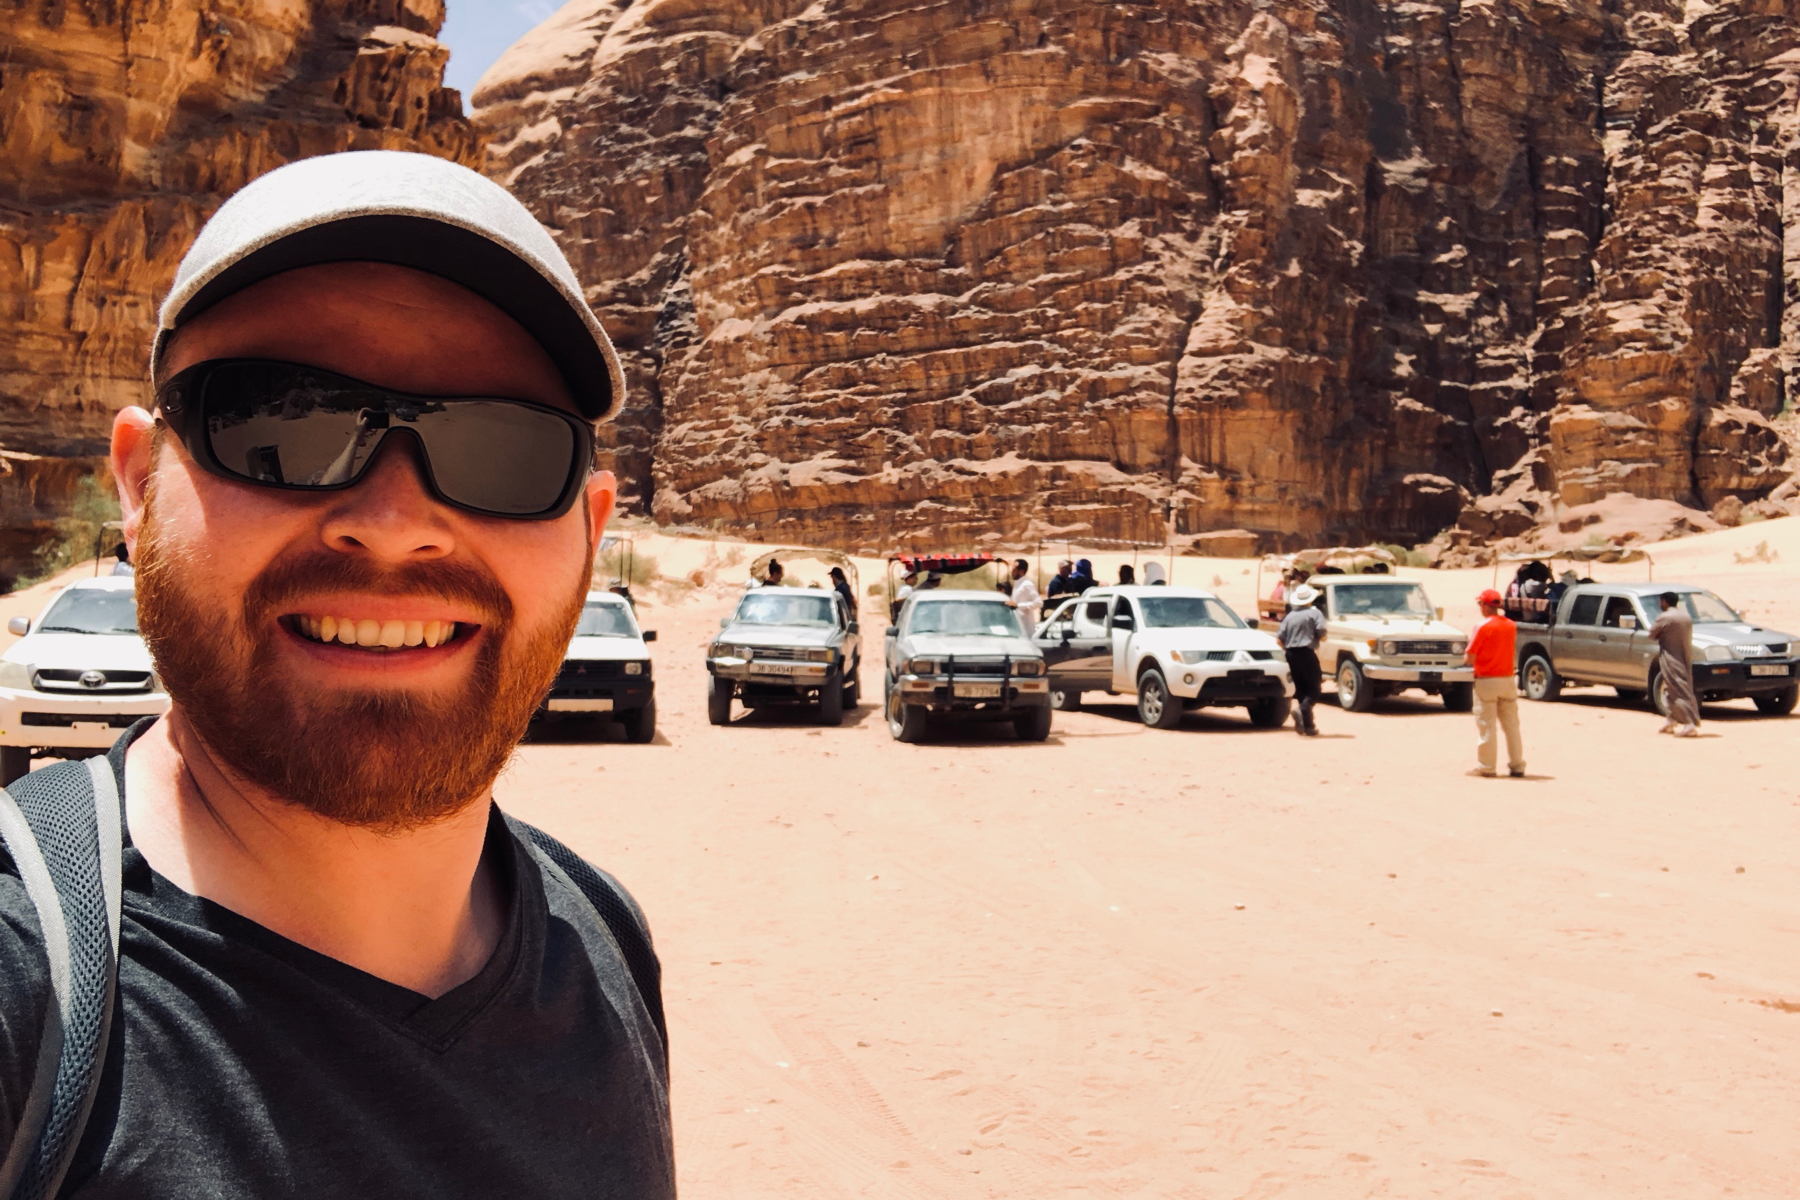 Judson poses with Wadi Rum tour jeeps in the Lawrence Memorial Bedouin Camp